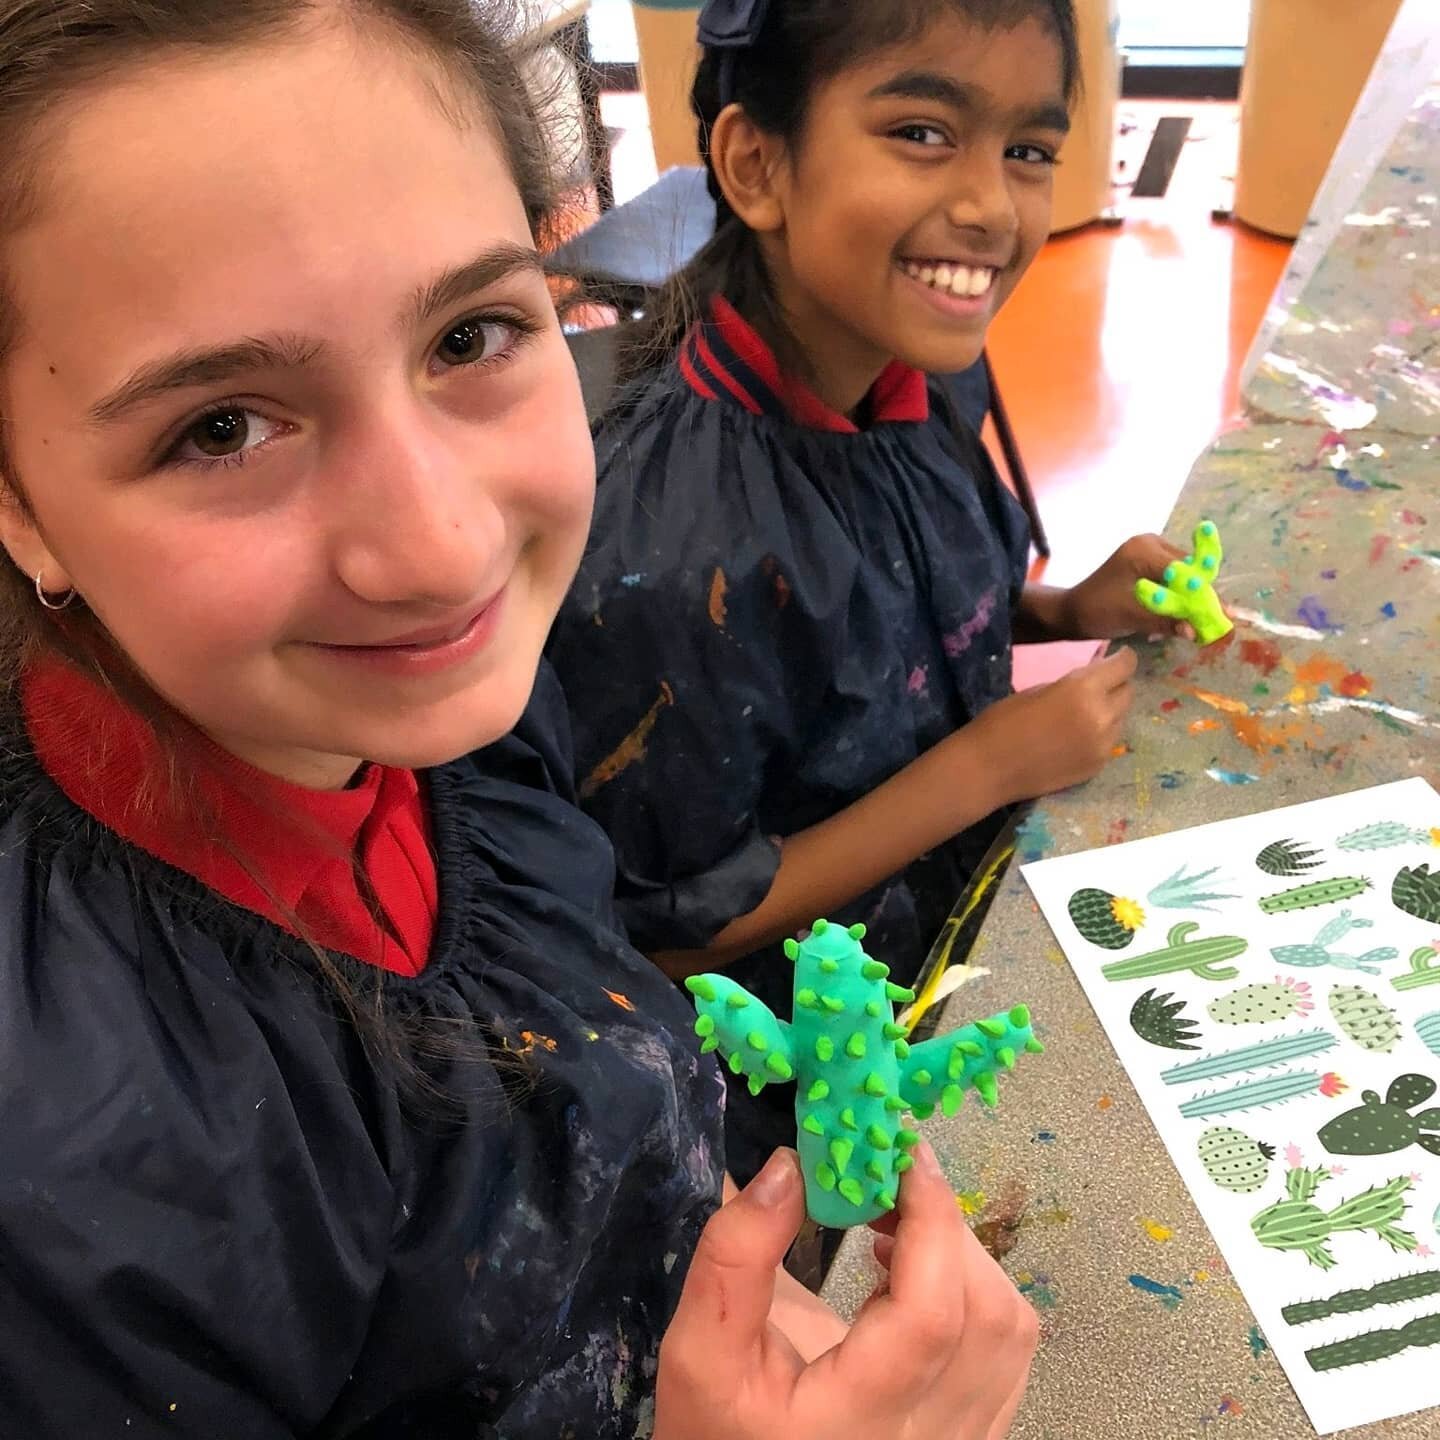 #artinthemaking⠀
⠀
Preparations for next term's Art Show were in full swing last week 🎨! We can't wait to share  our creations with our wonderful community ❤️⠀
⠀
#shoakleigh #sacredheartoakleigh #sacredheart #oakleigh #primaryschool #school #parenti